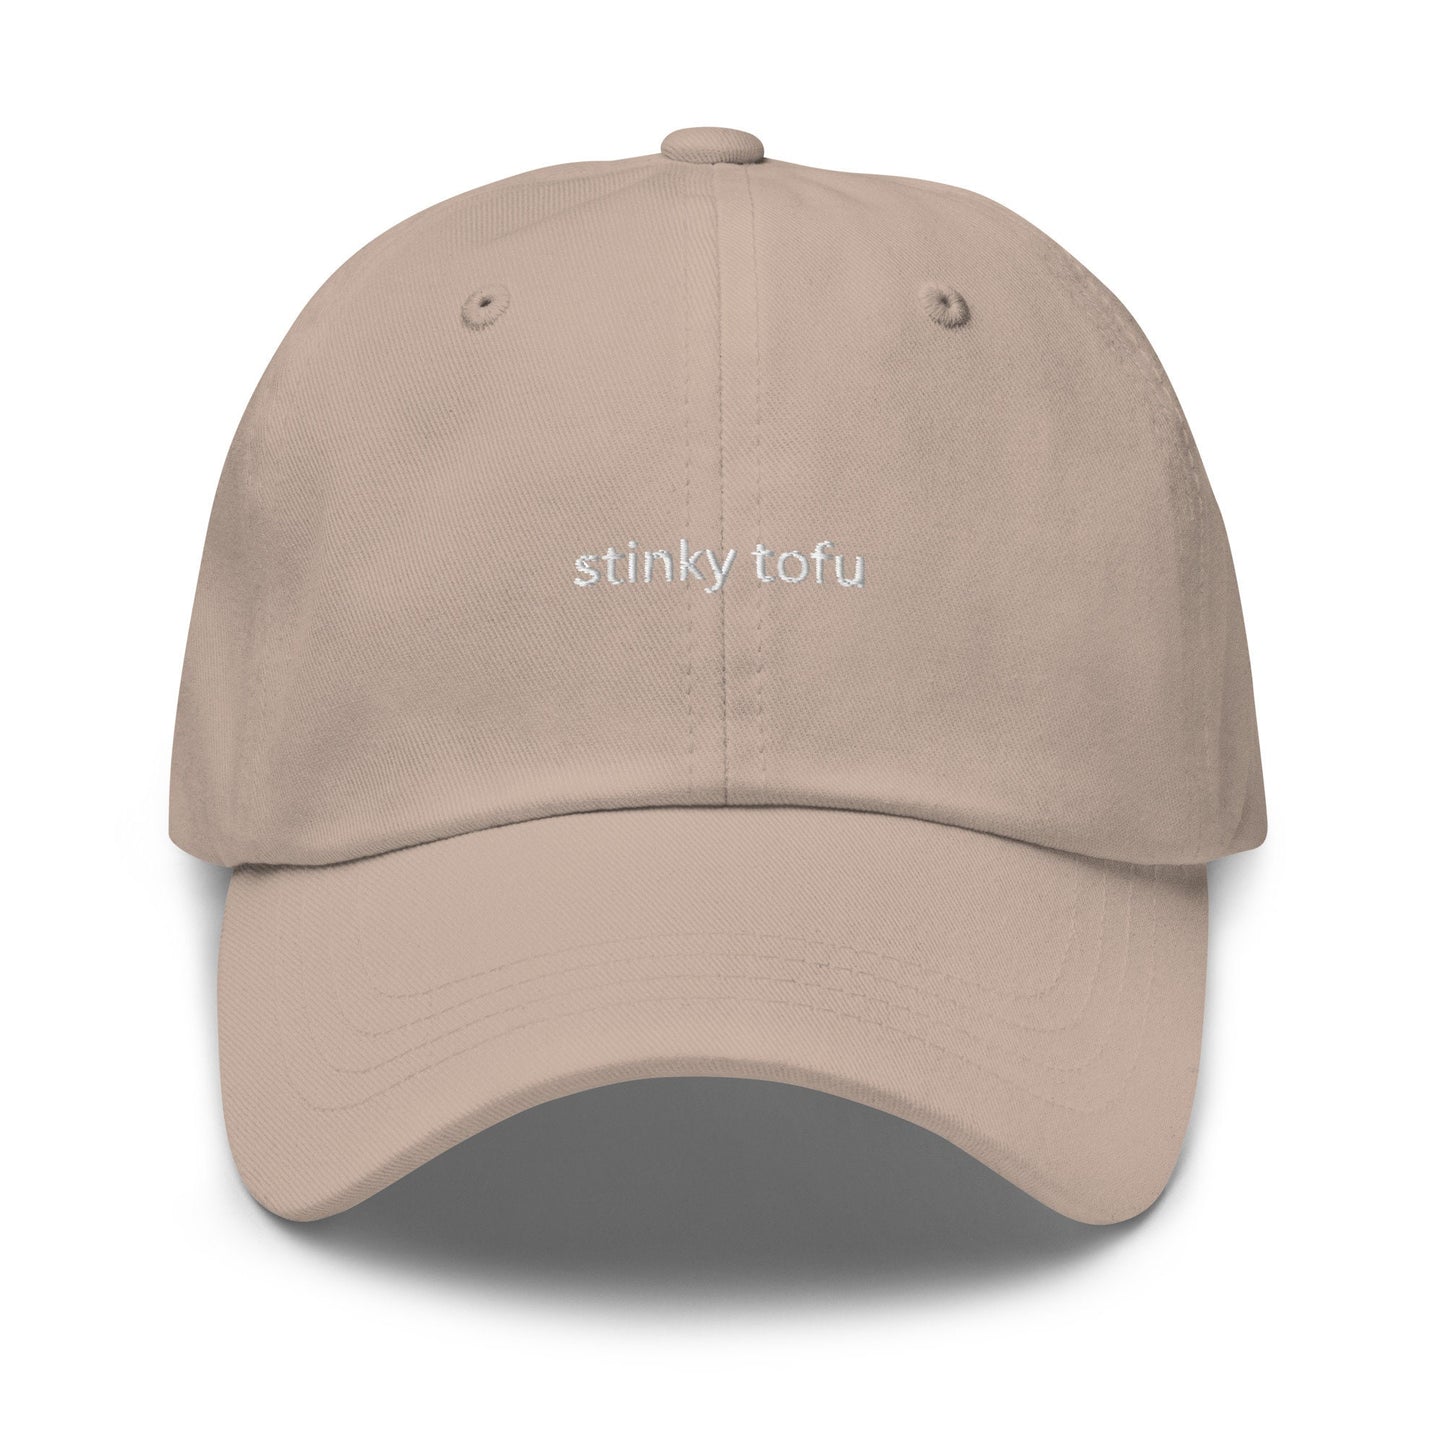 Stinky Tofu Hat - chòu dòufu - Chinese Food Lovers - Cotton Embroidered Dad Cap - Multiple Colors